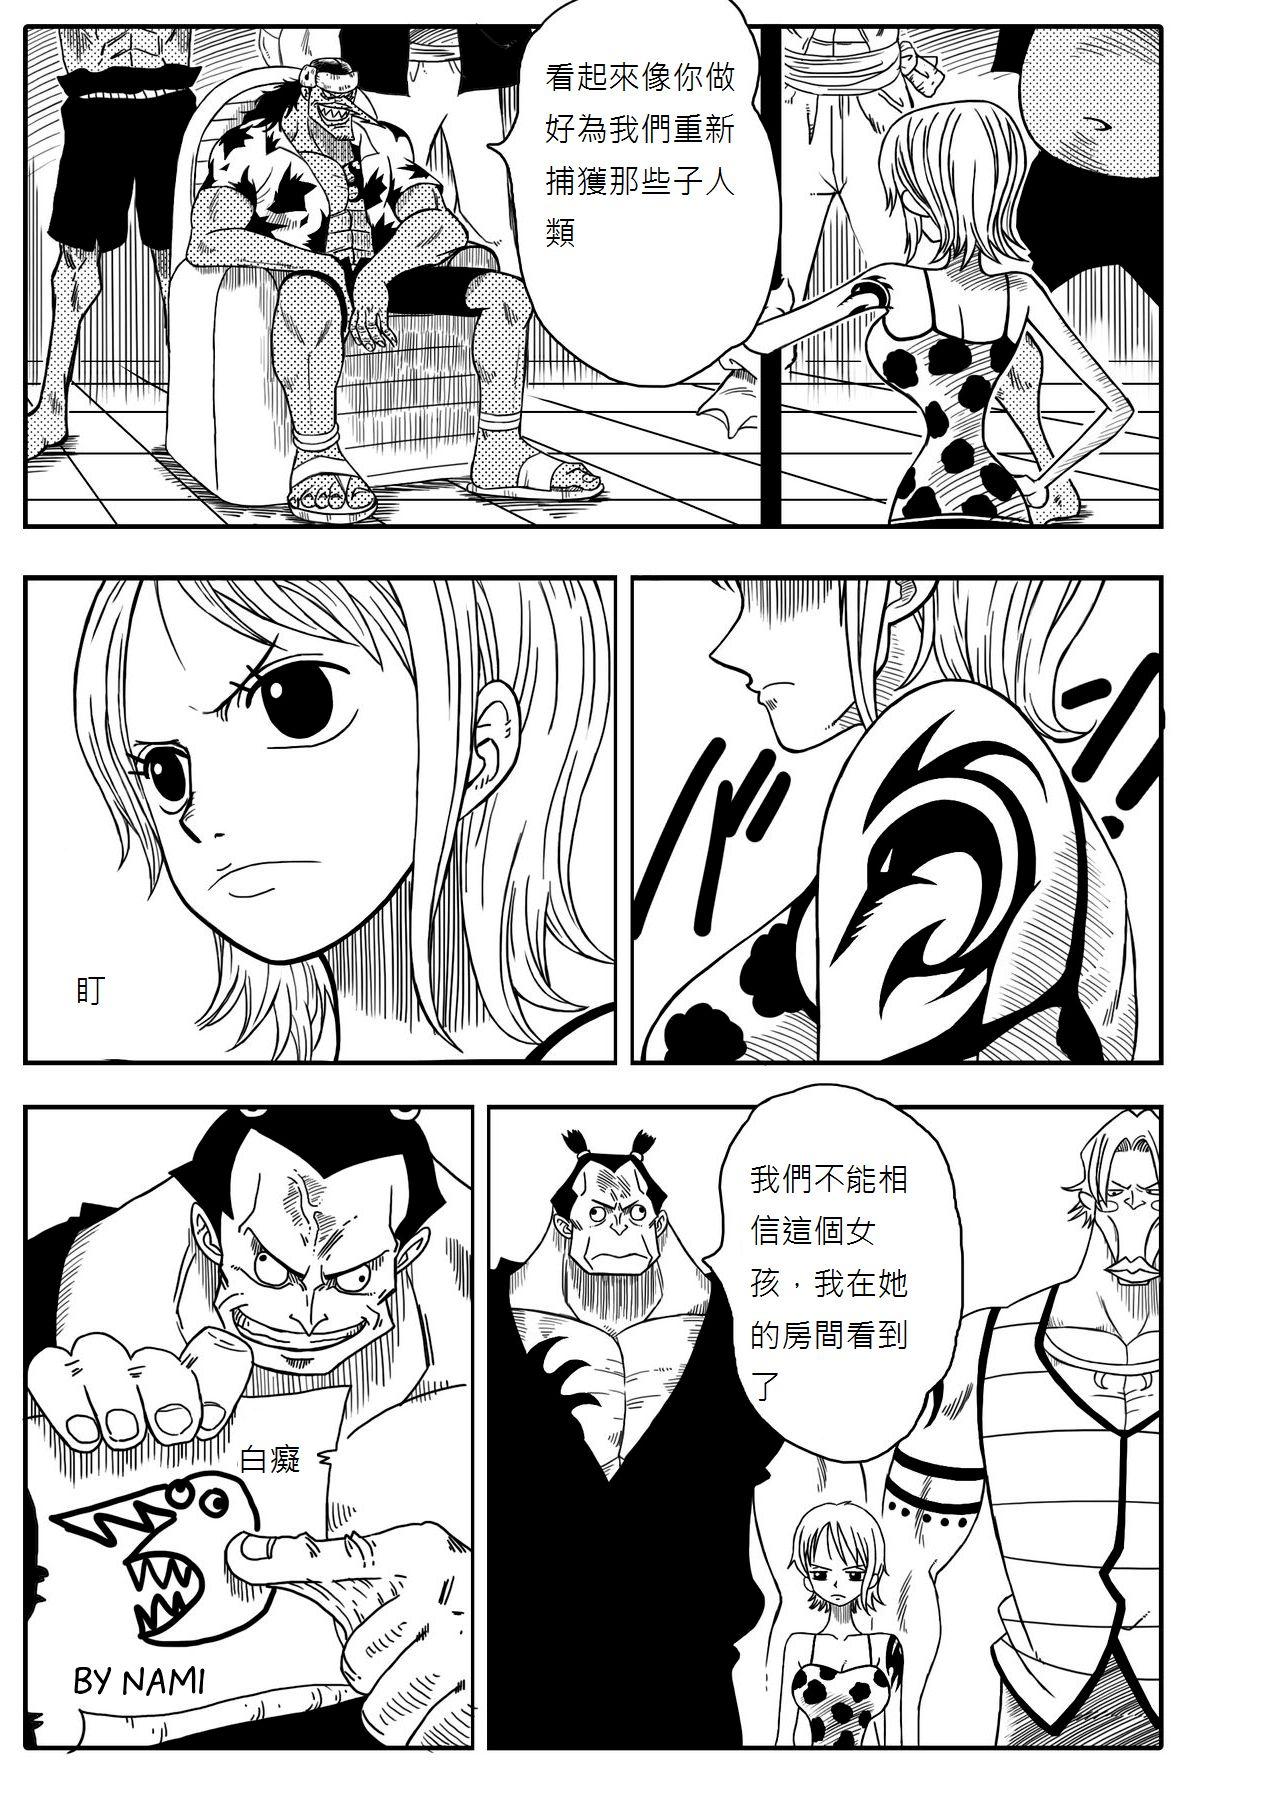 Abuse Two Piece - Nami vs Arlong - One piece Gagging - Page 4